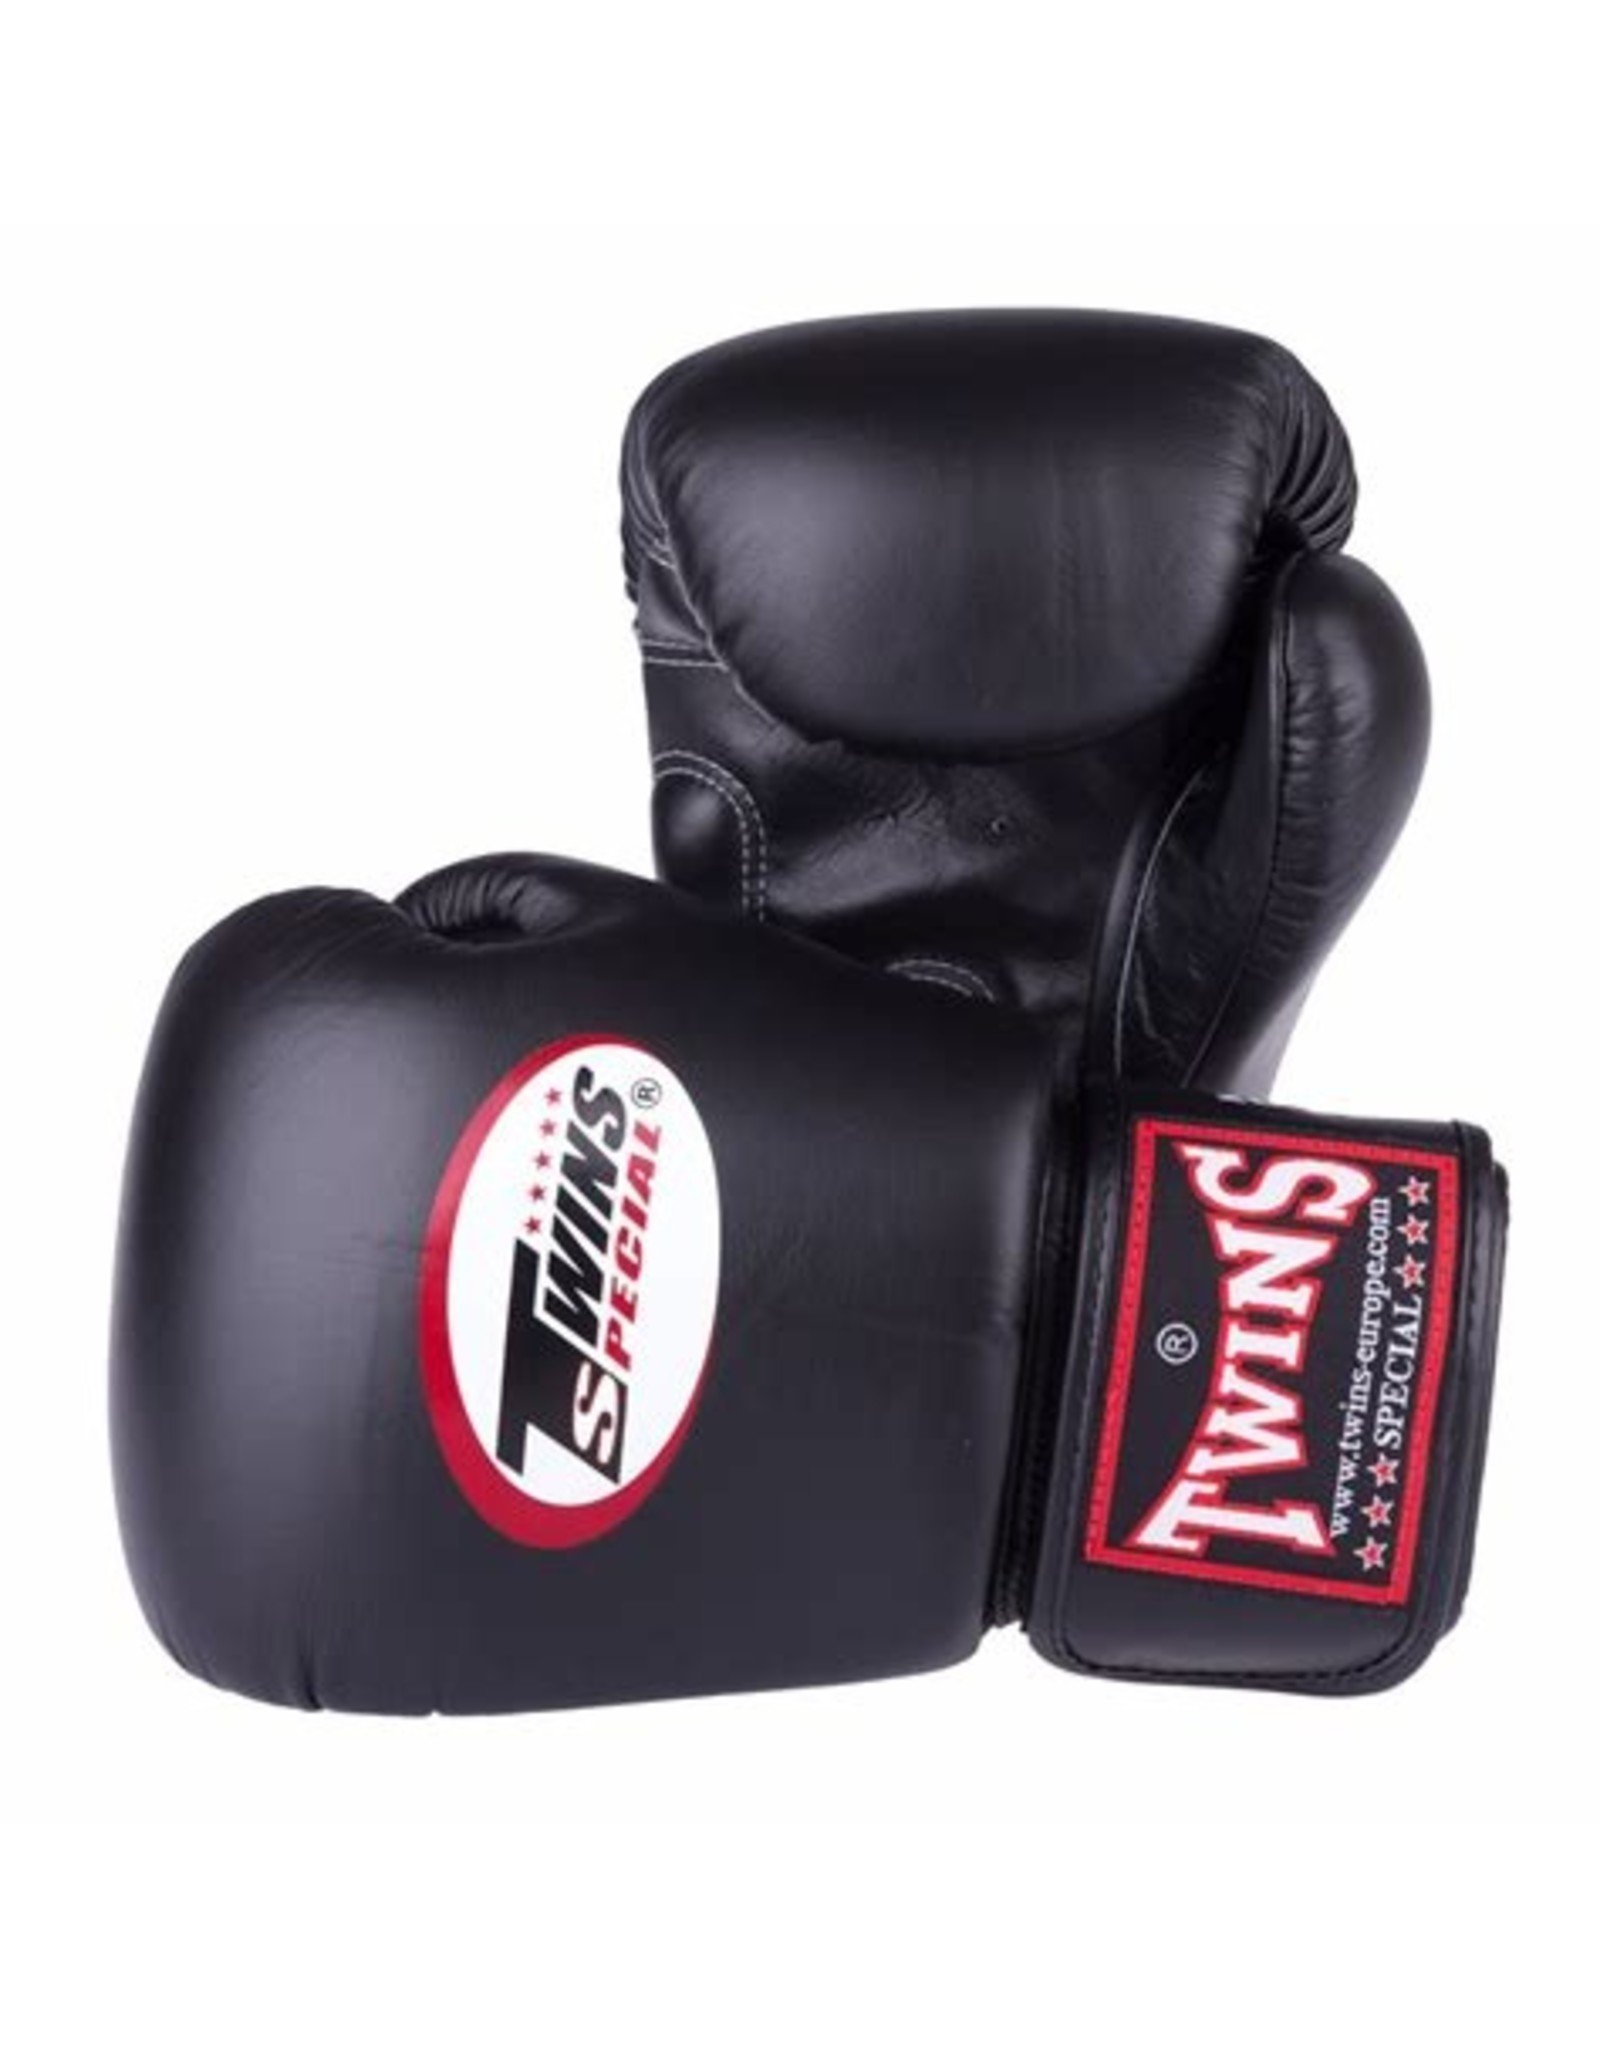 Boxing Gloves - Twins - 16 oz.